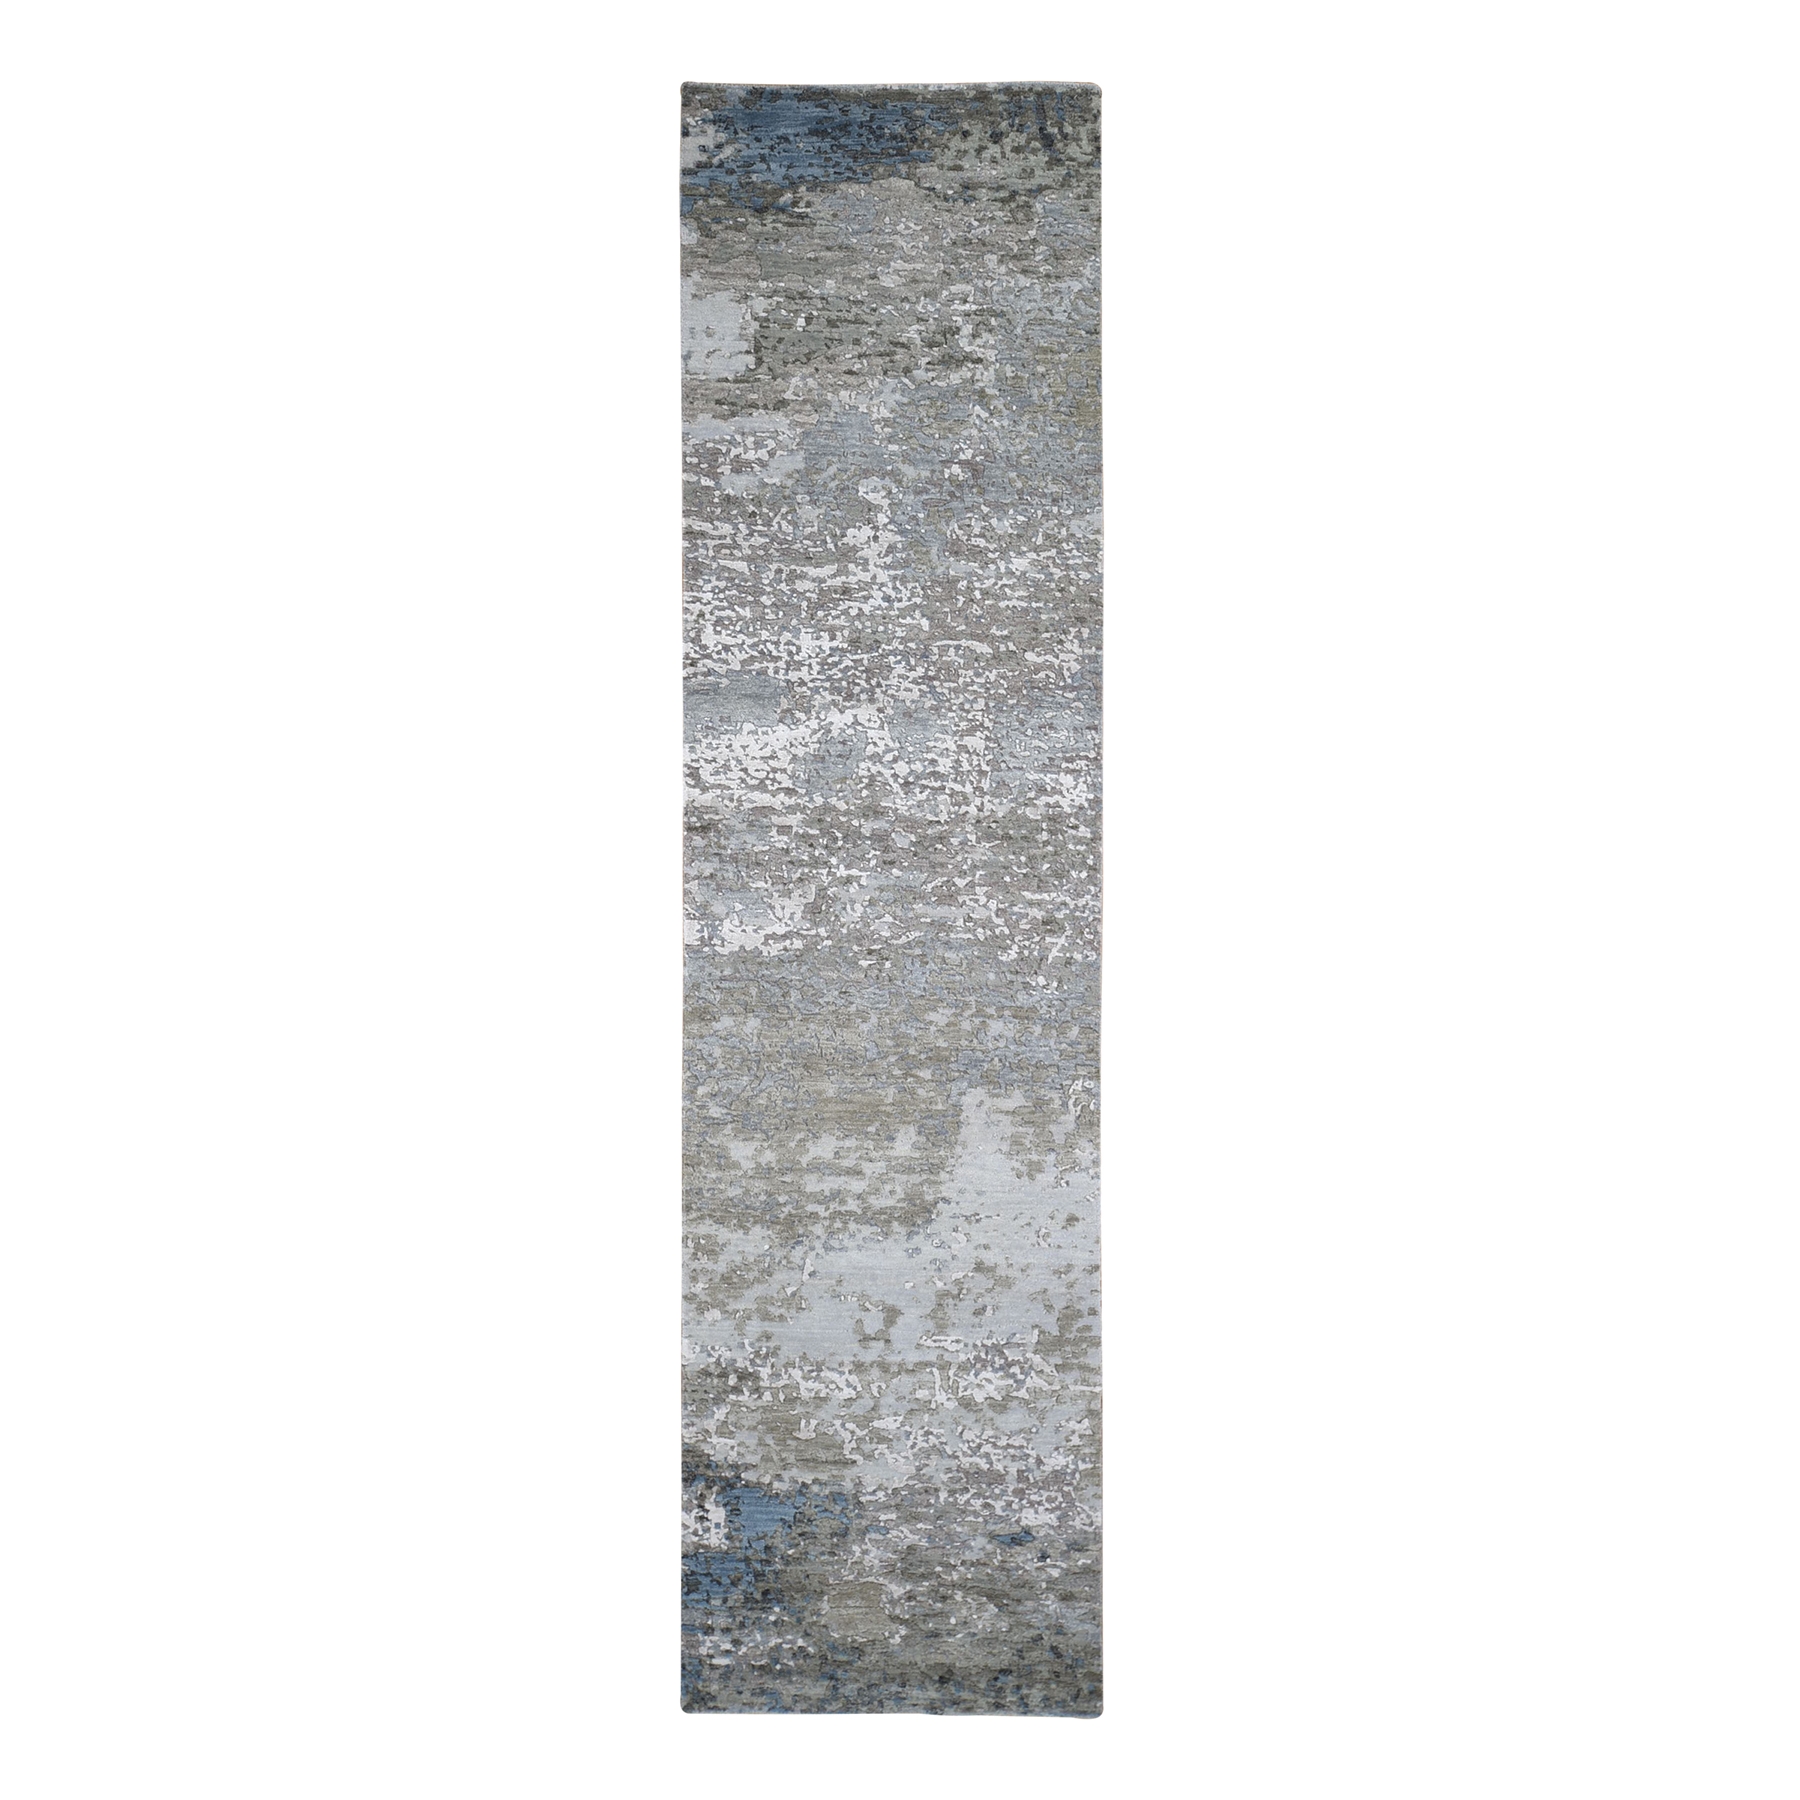 2'6"x10'6" Abstract Design Wool and Silk Hi-Low Pile Gray Denser Weave Hand Woven Runner Oriental Rug 